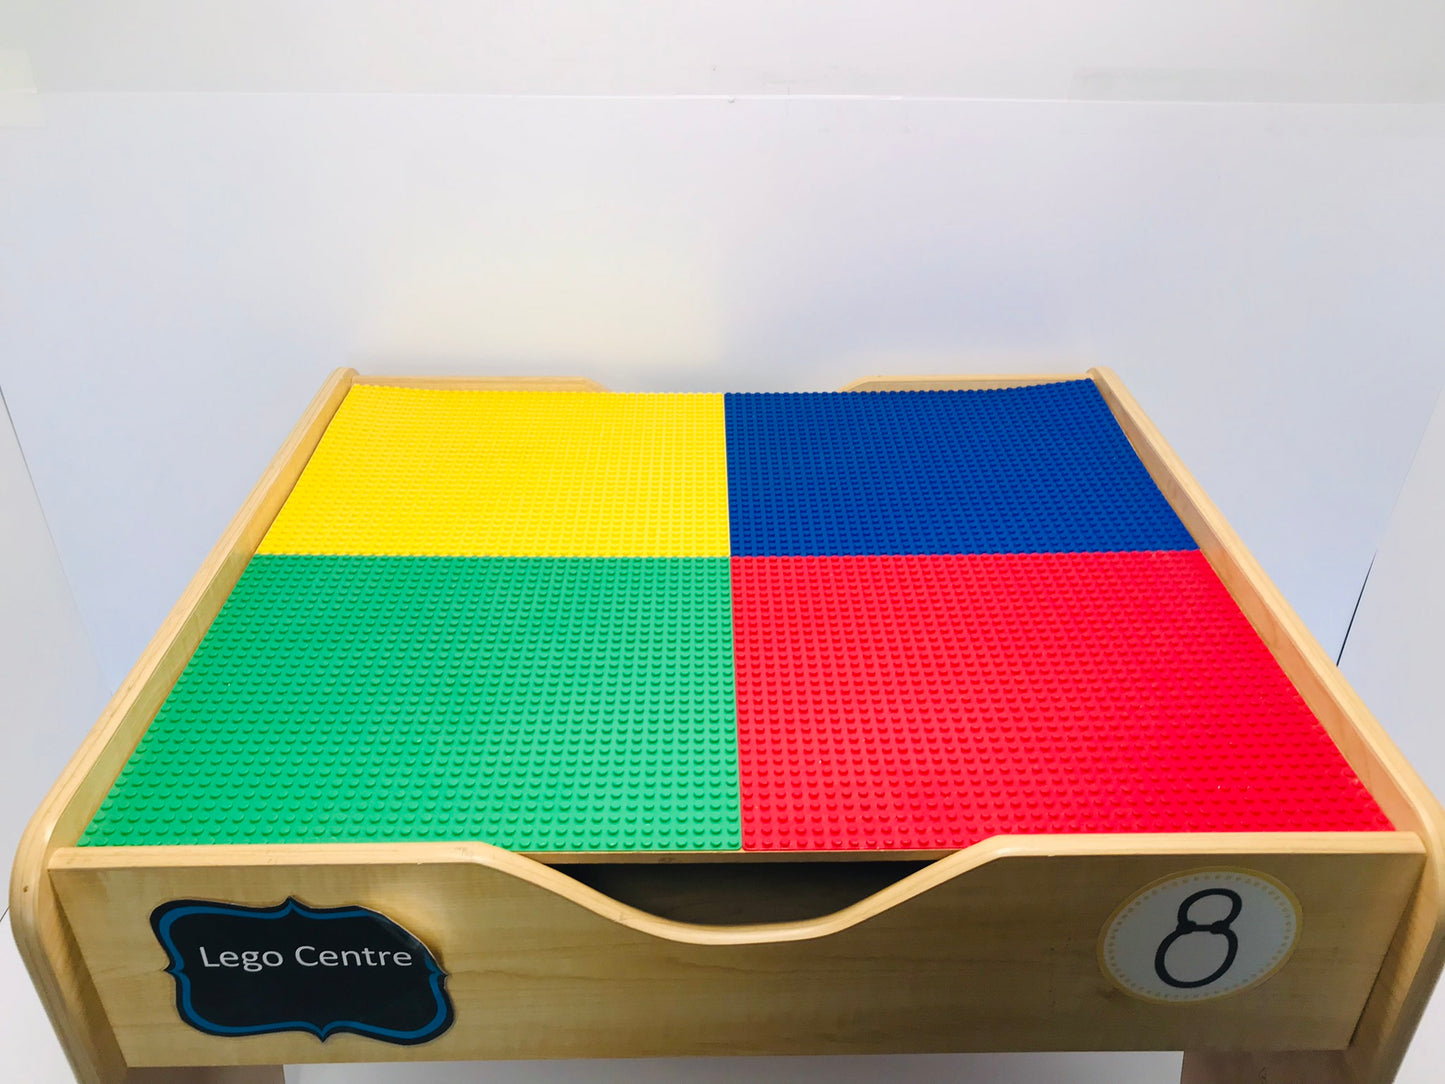 Lego KidKraft Activity Table Ages 3+ Fits Regular Size and Duplo Size Lego